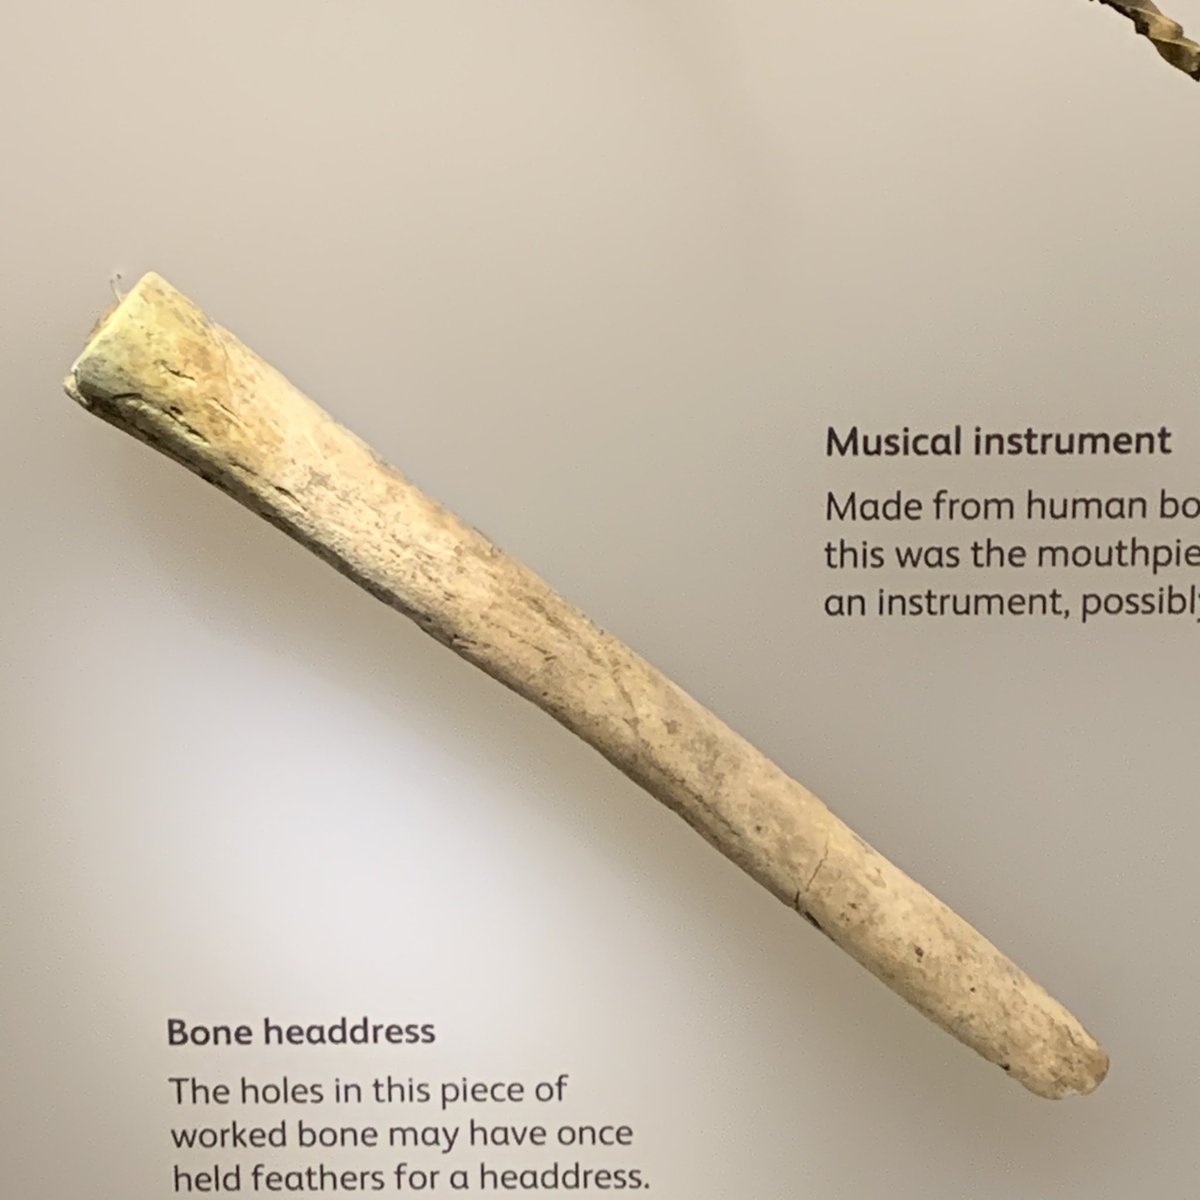 Trumpet made from a human bone. The person whose bone it was made from seems to have been contemporaneous with the man the musical instrument was then buried with.